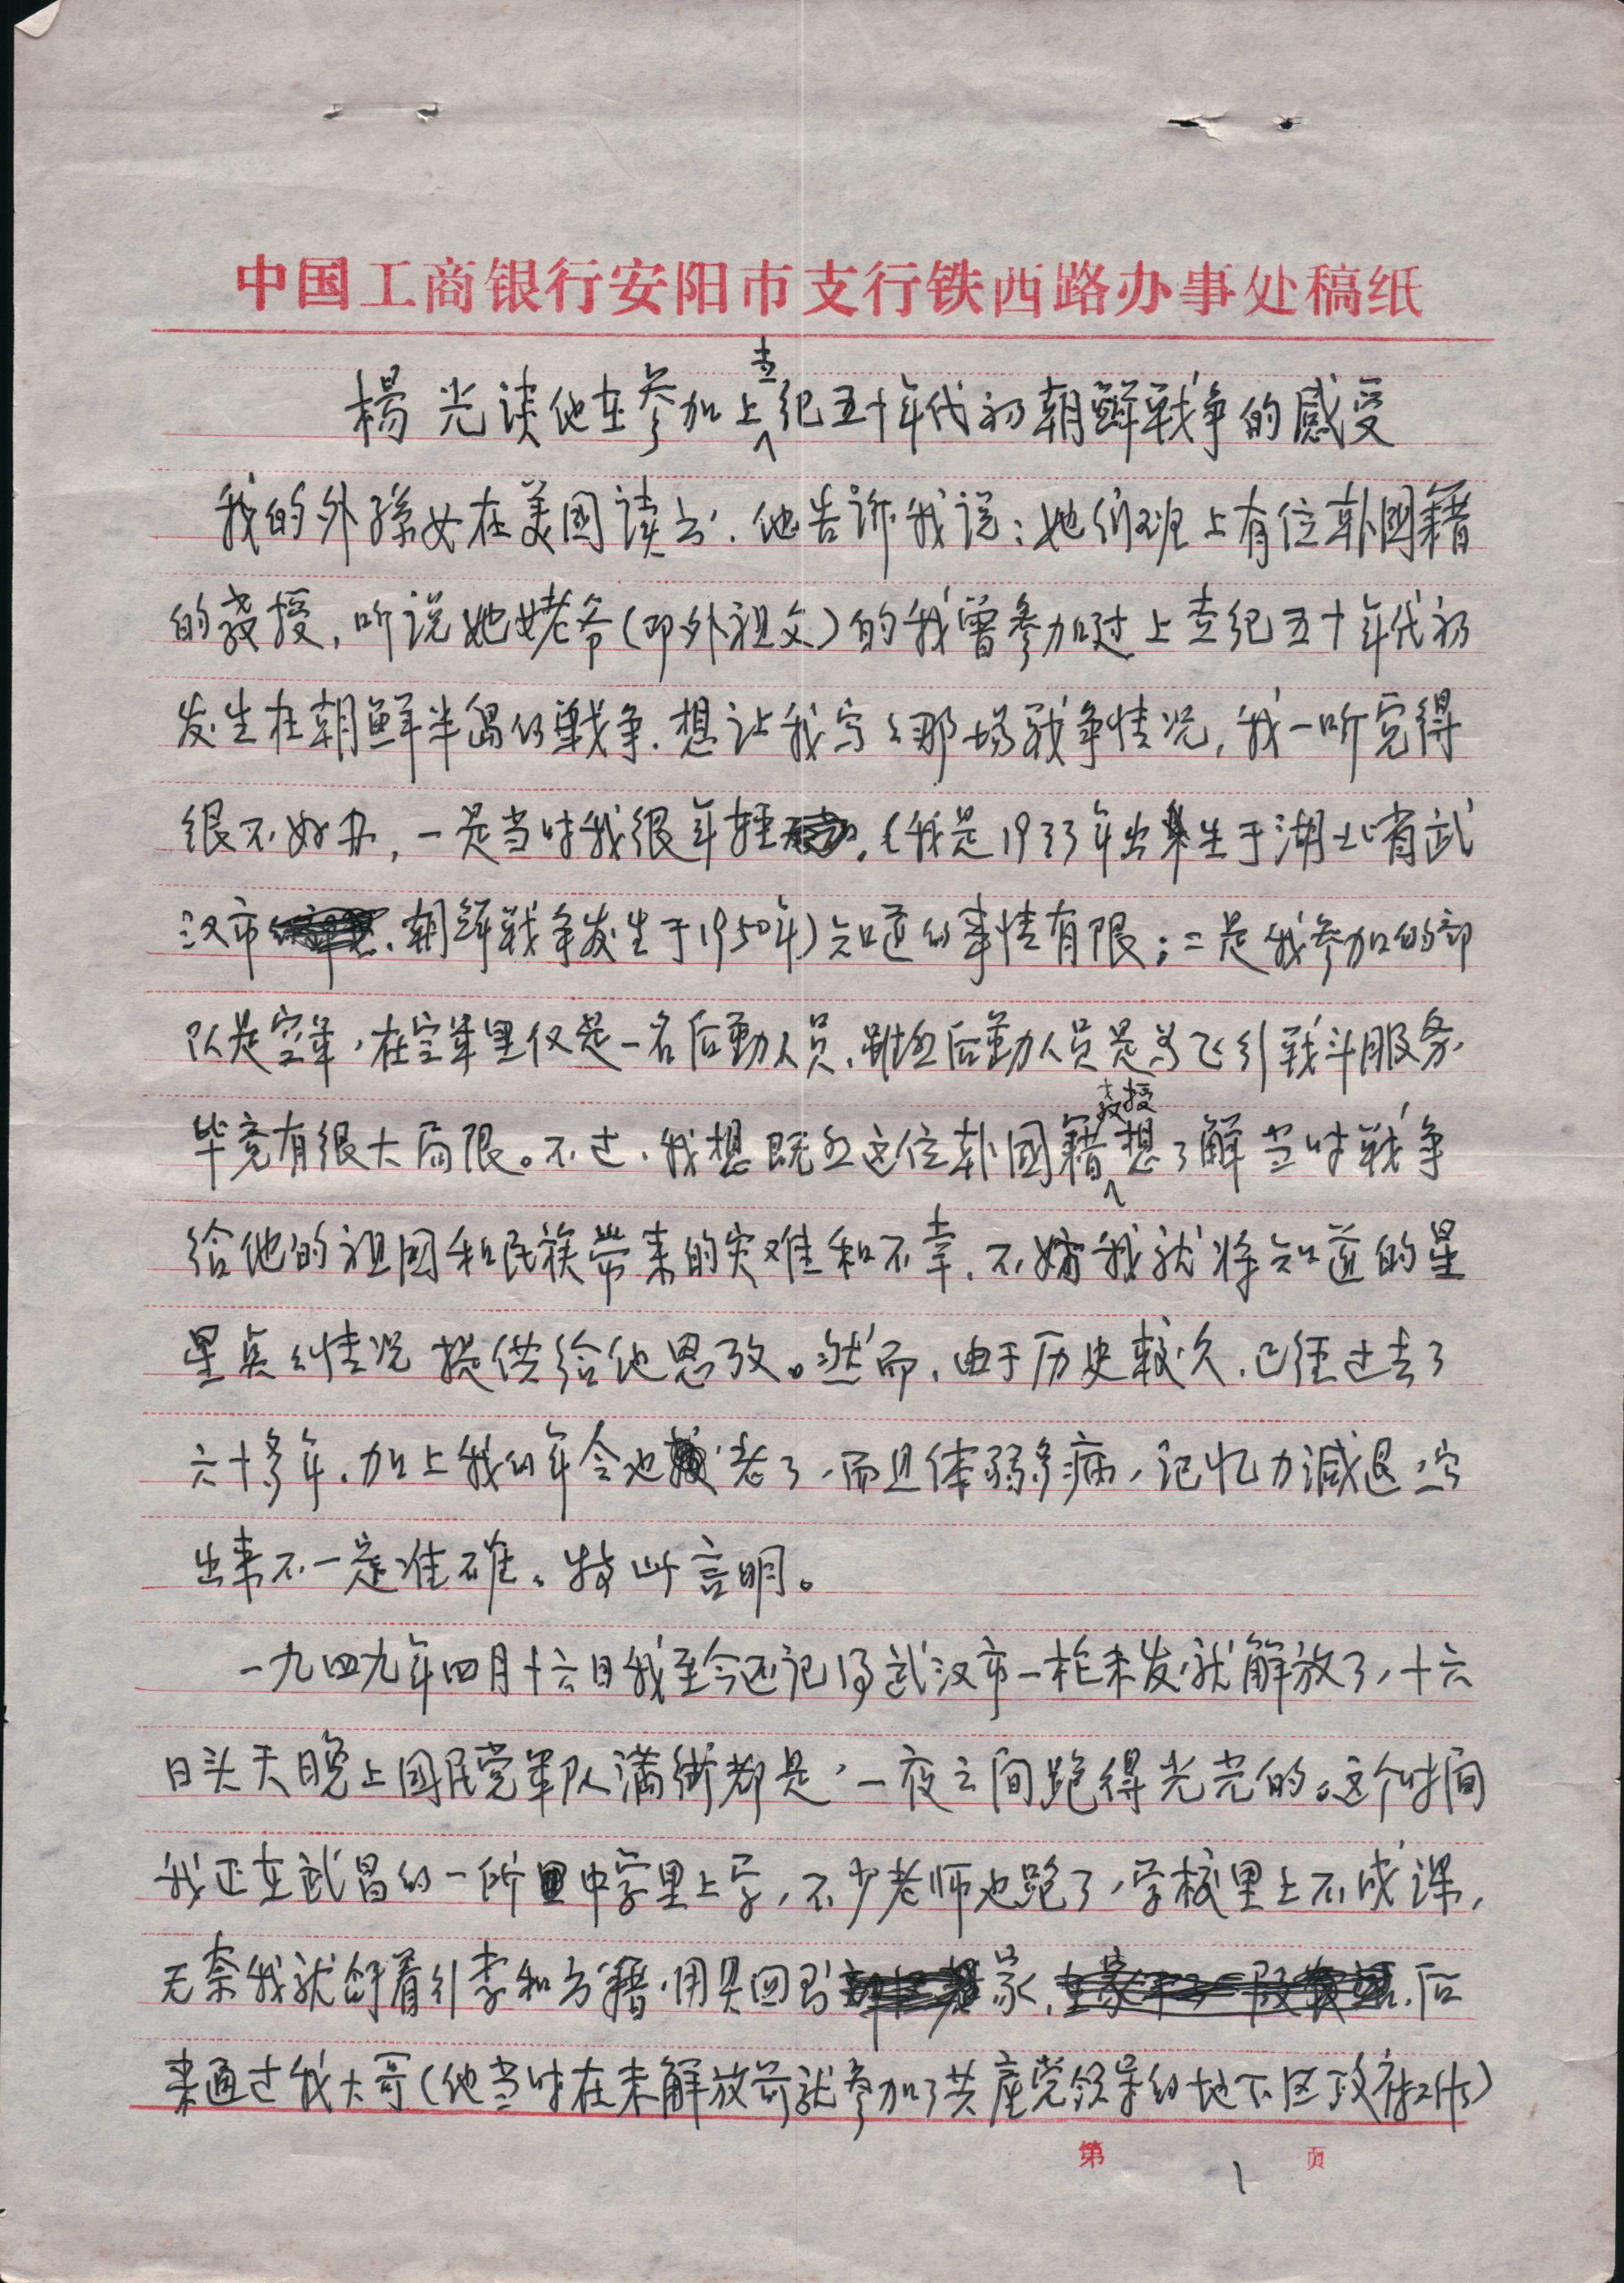 The first page of the written history of Yang Kwang Tan, who took part in the Korean War as part of the Chinese Army. Tan's niece listened to one of Dr. Han's seminars on the Korean Peninsula and thus asked her father to write about Tan's service. 